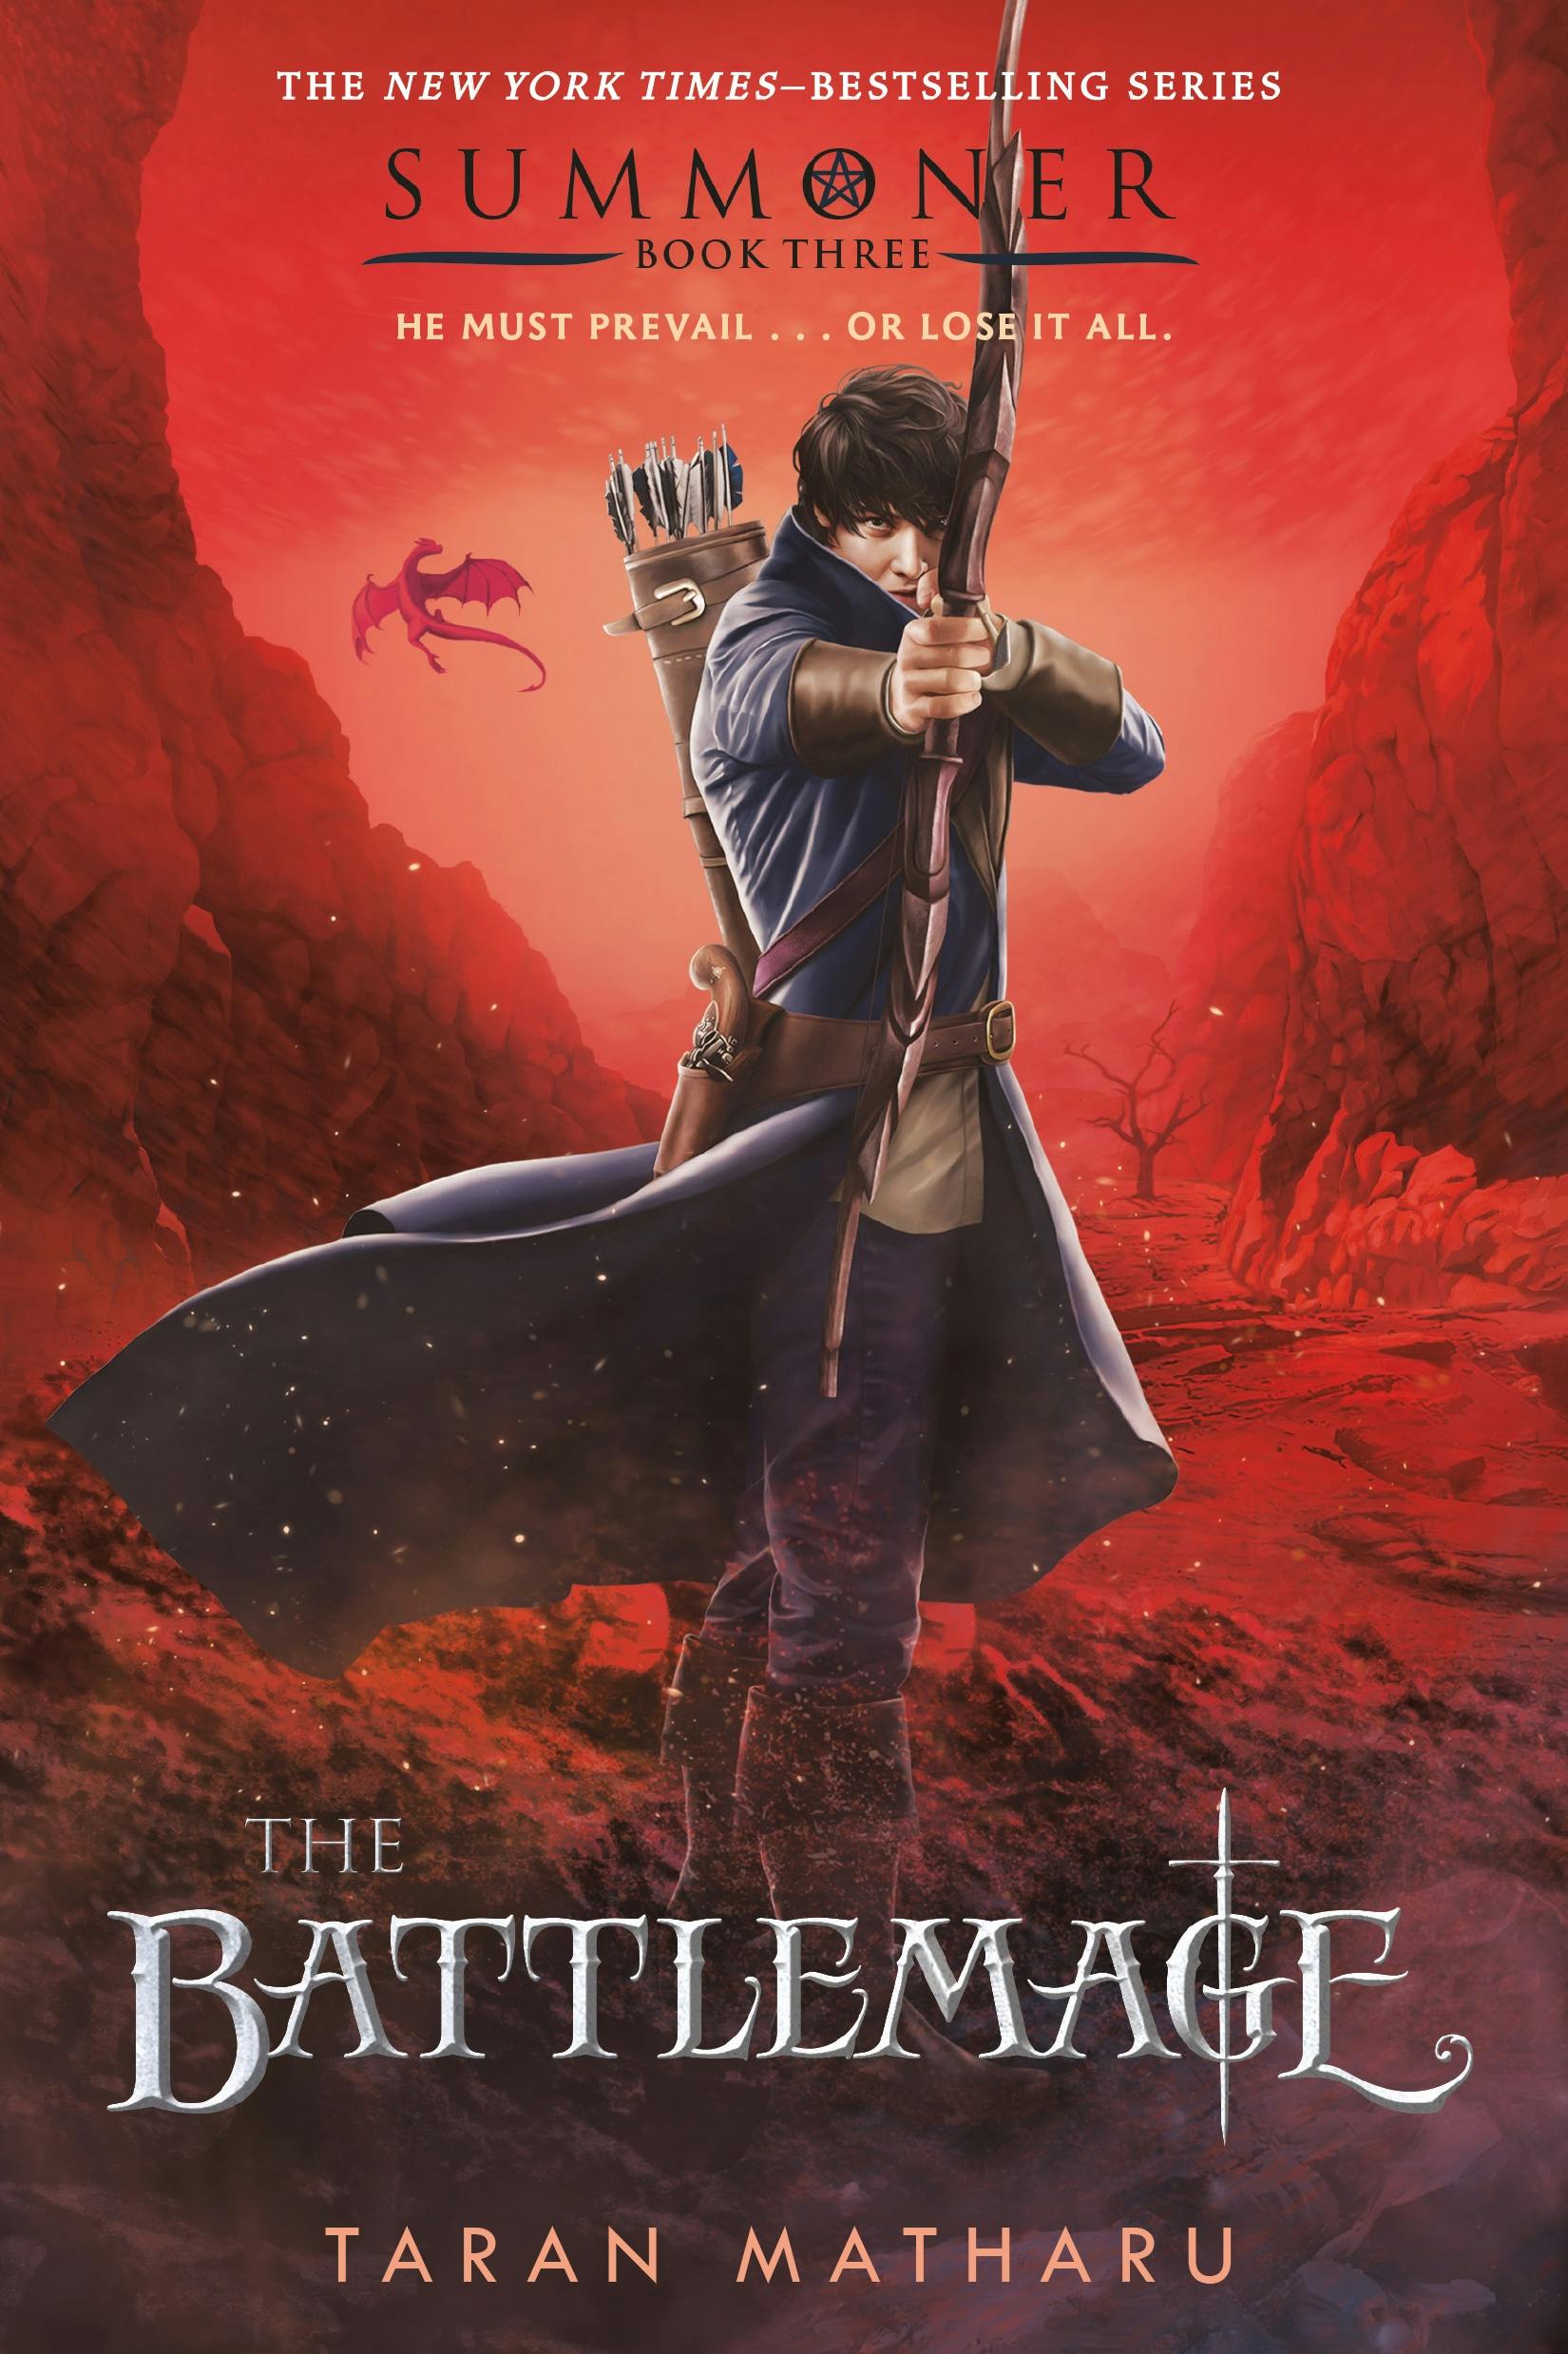 A Mage Awakens: Book 3 of the Fire of the Jidaan Trilogy by Whit